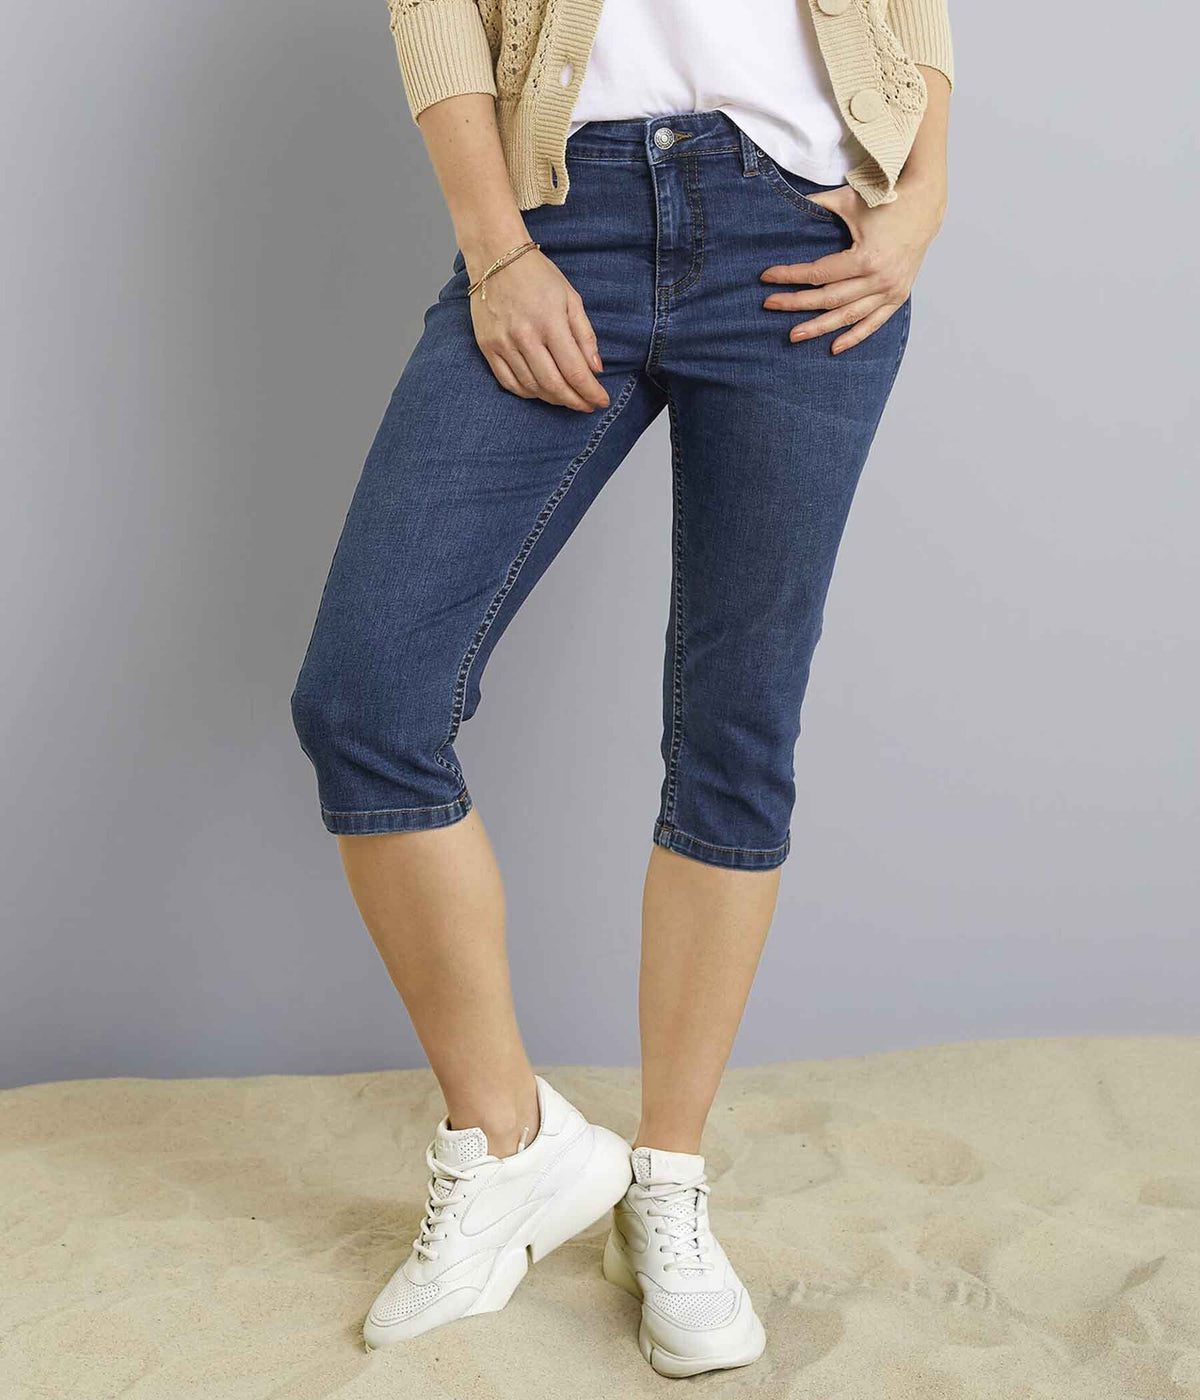 B.YOUNG KNICKERS JEANS I DENIM BLUE